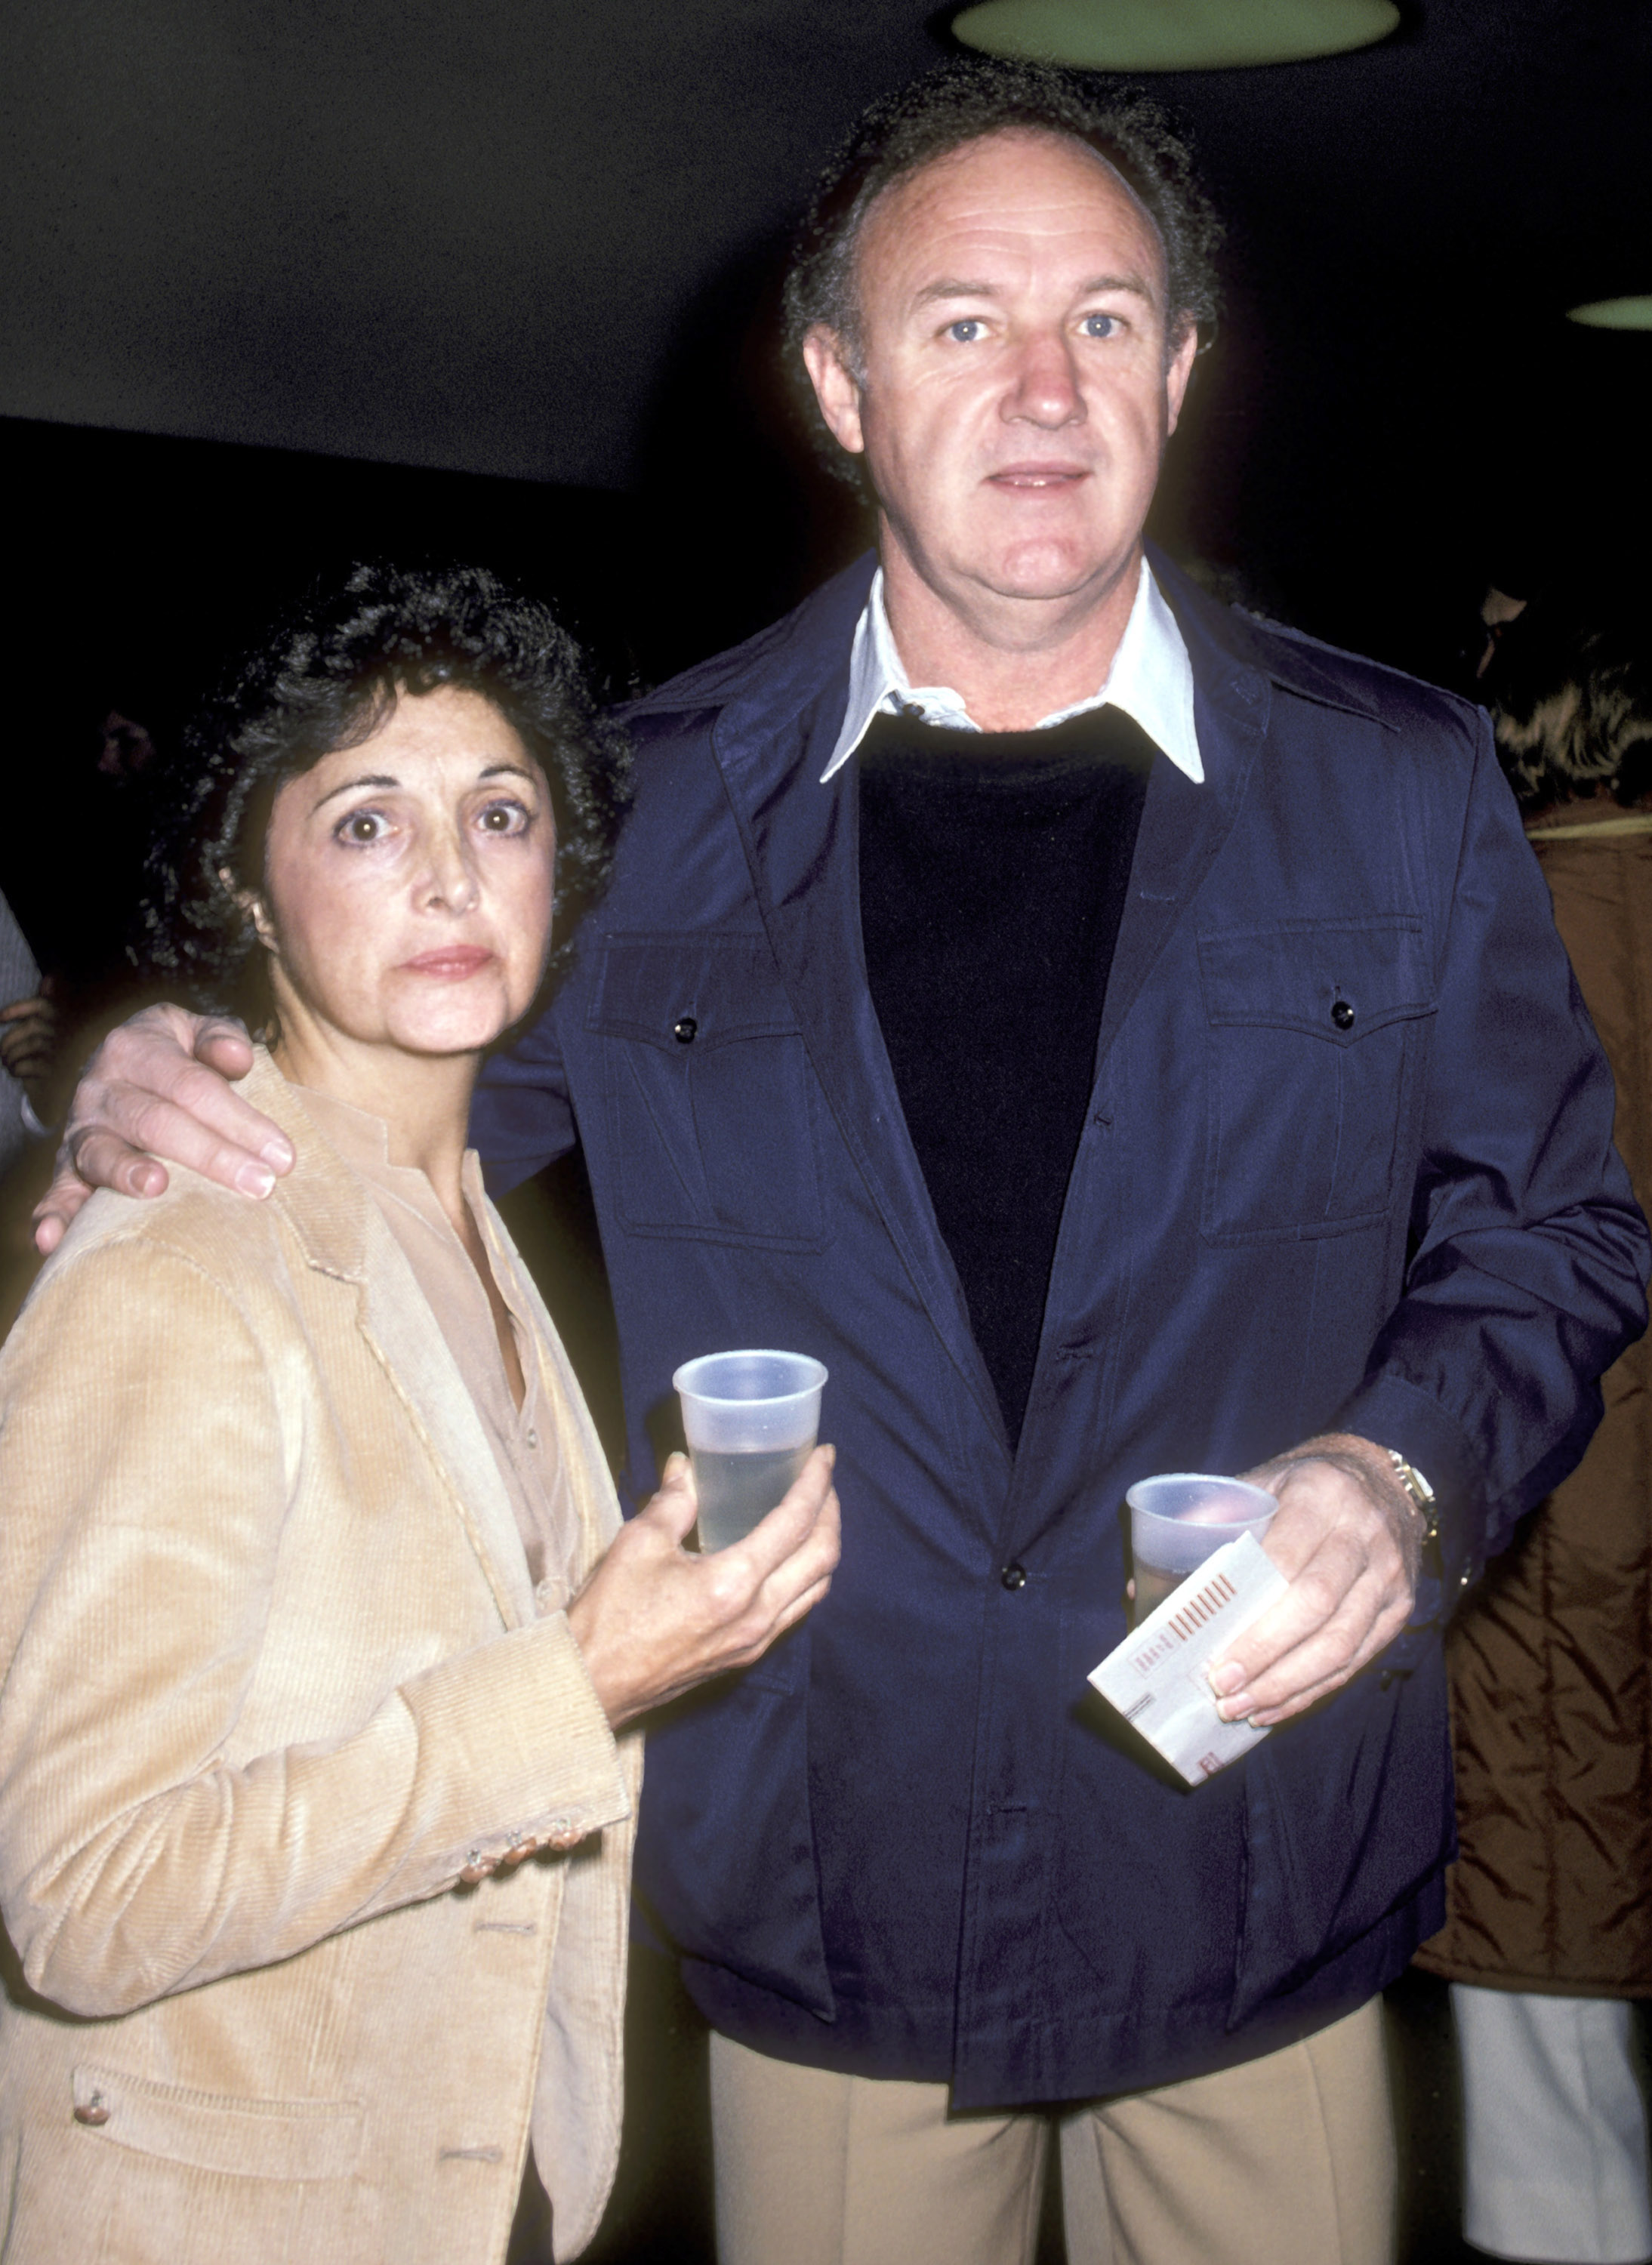 Gene Hackman and Faye Maltese at the Avon Tennis Tournament - VIP Reception at The Forum in Los Angeles, California | Source: Getty Images